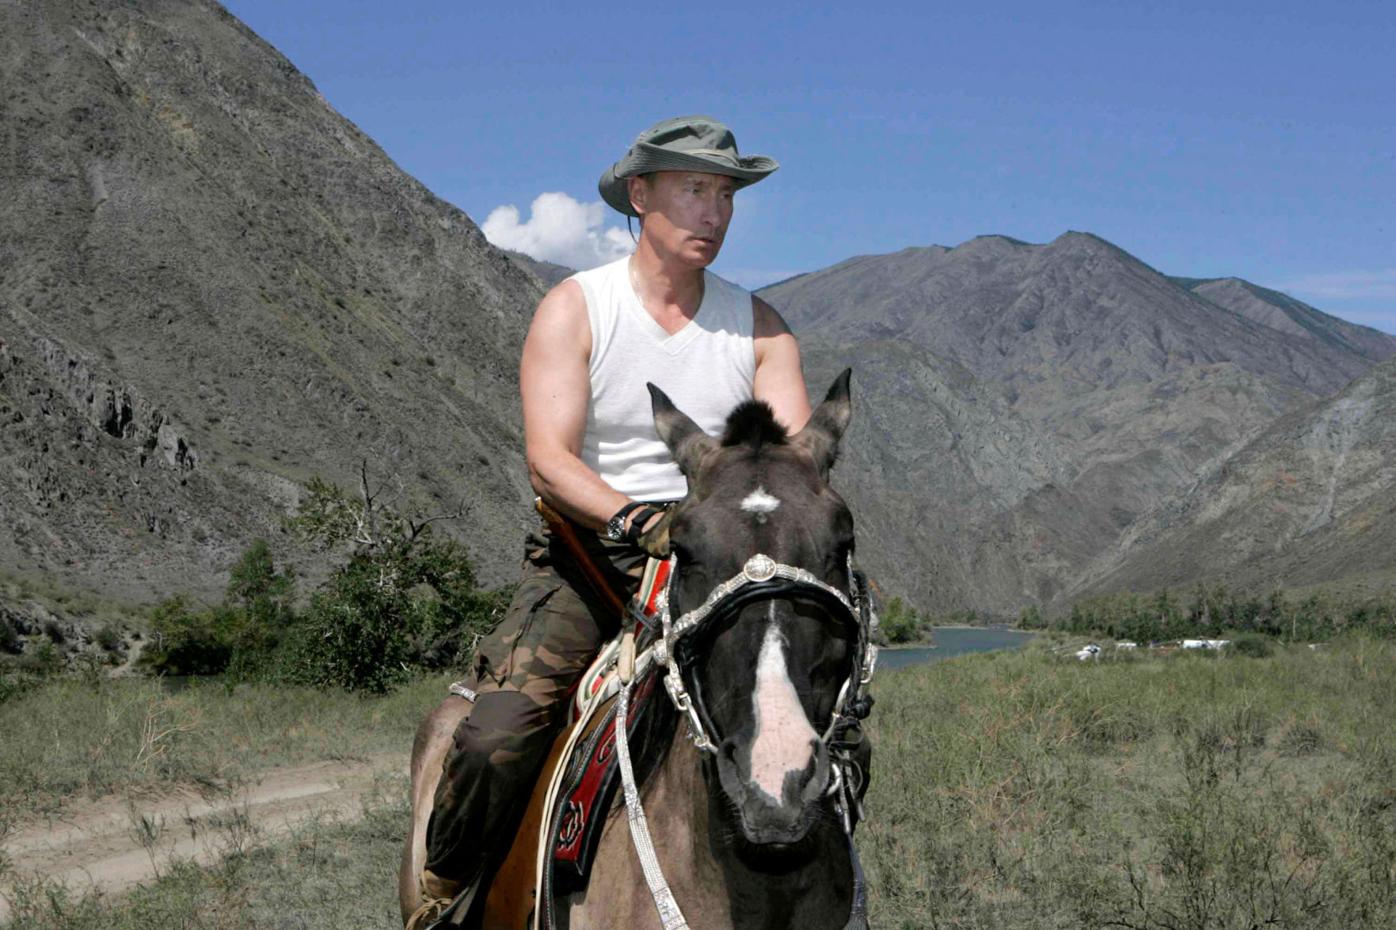 Putin tells how he fell off horse | Back Page 